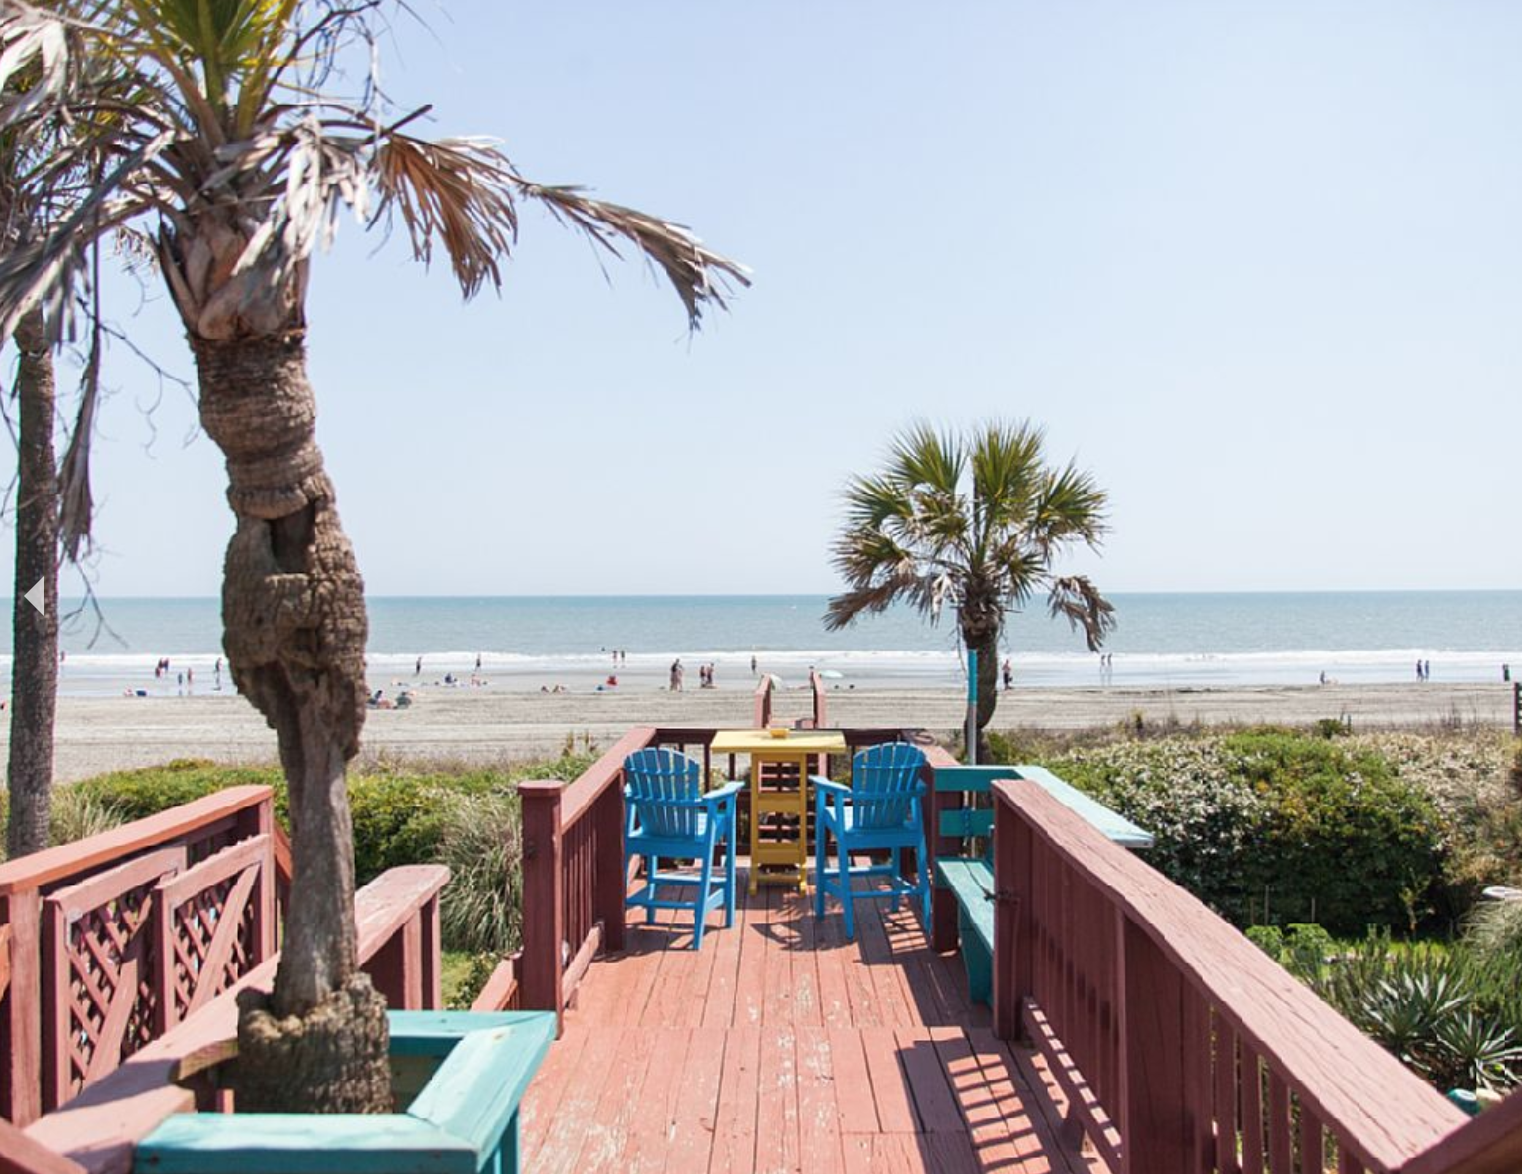 Stay at Funky Folly Beachfront Home At 919 East Arctic Avenue Folly Beach 29439 Call 843-580-3731